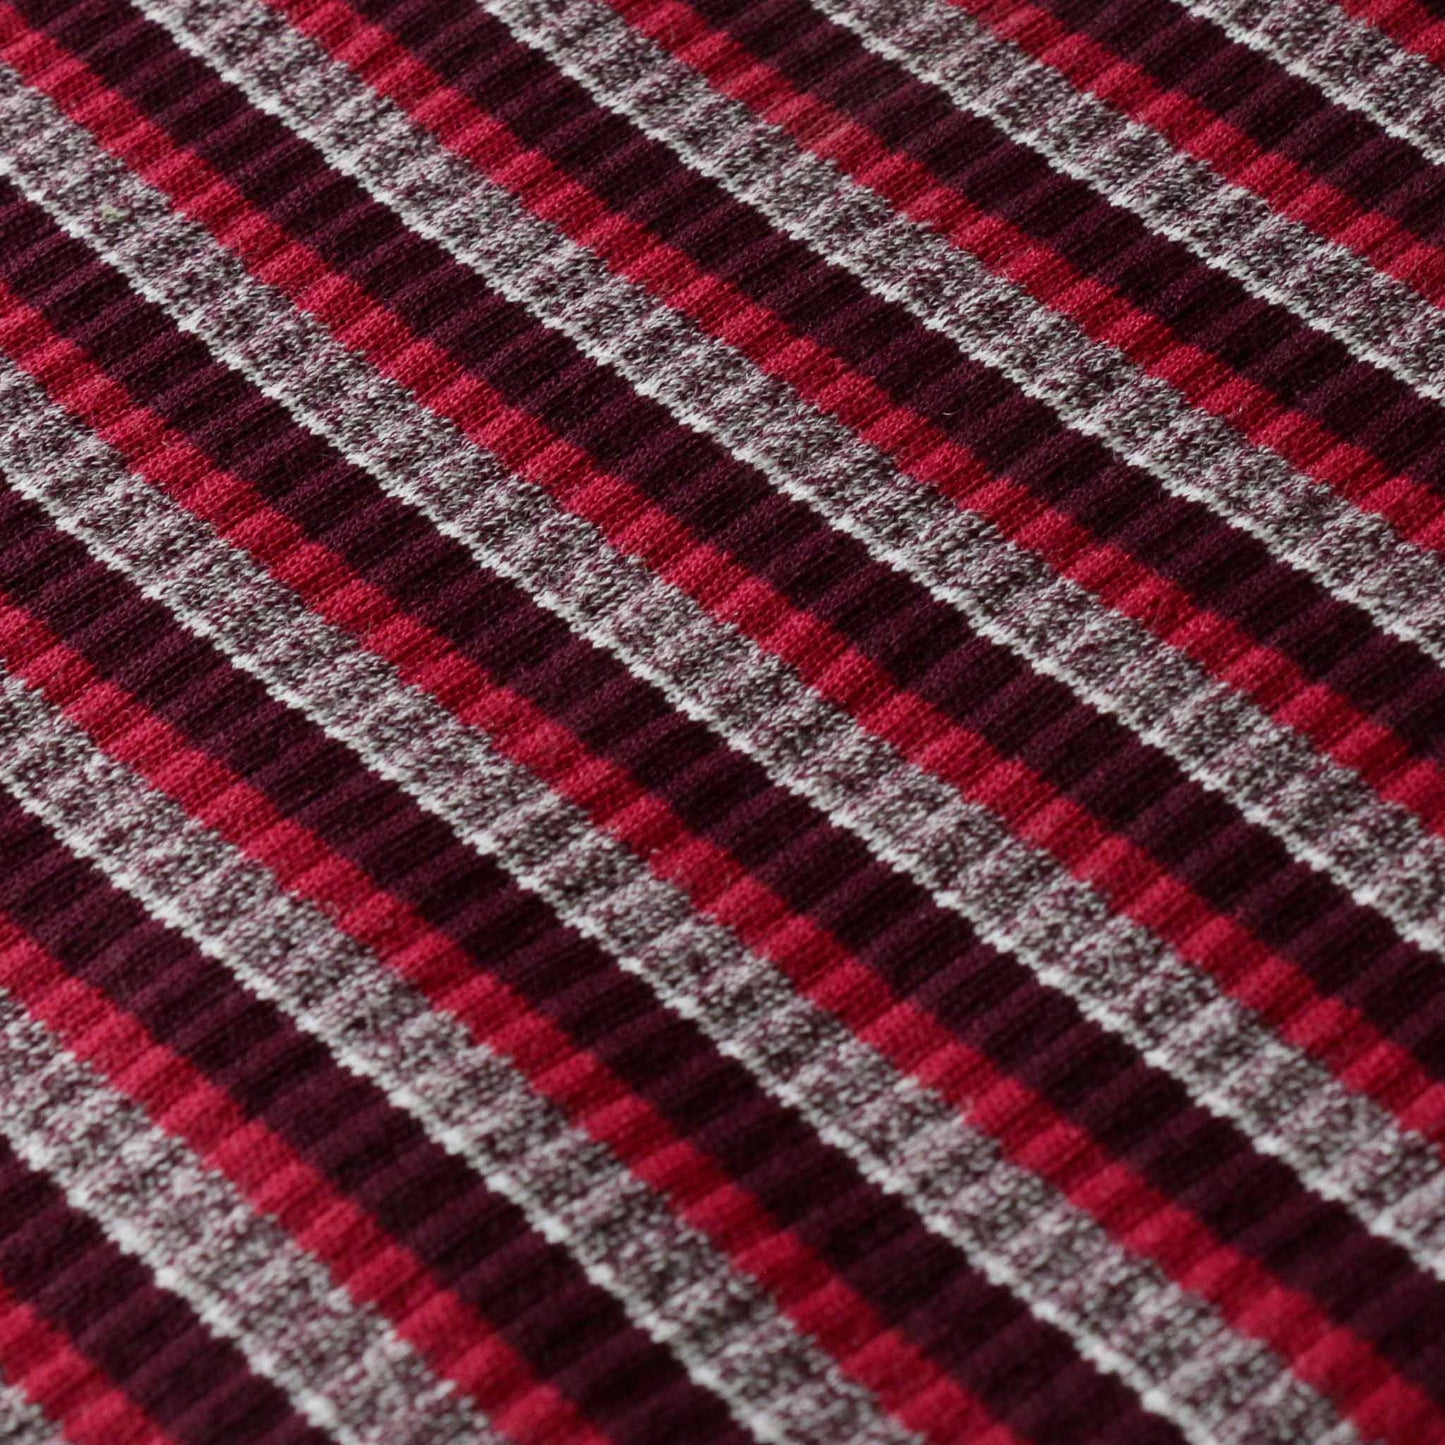 stripey rib jersey knit dressmaking fabric with pink grey and marron striped design